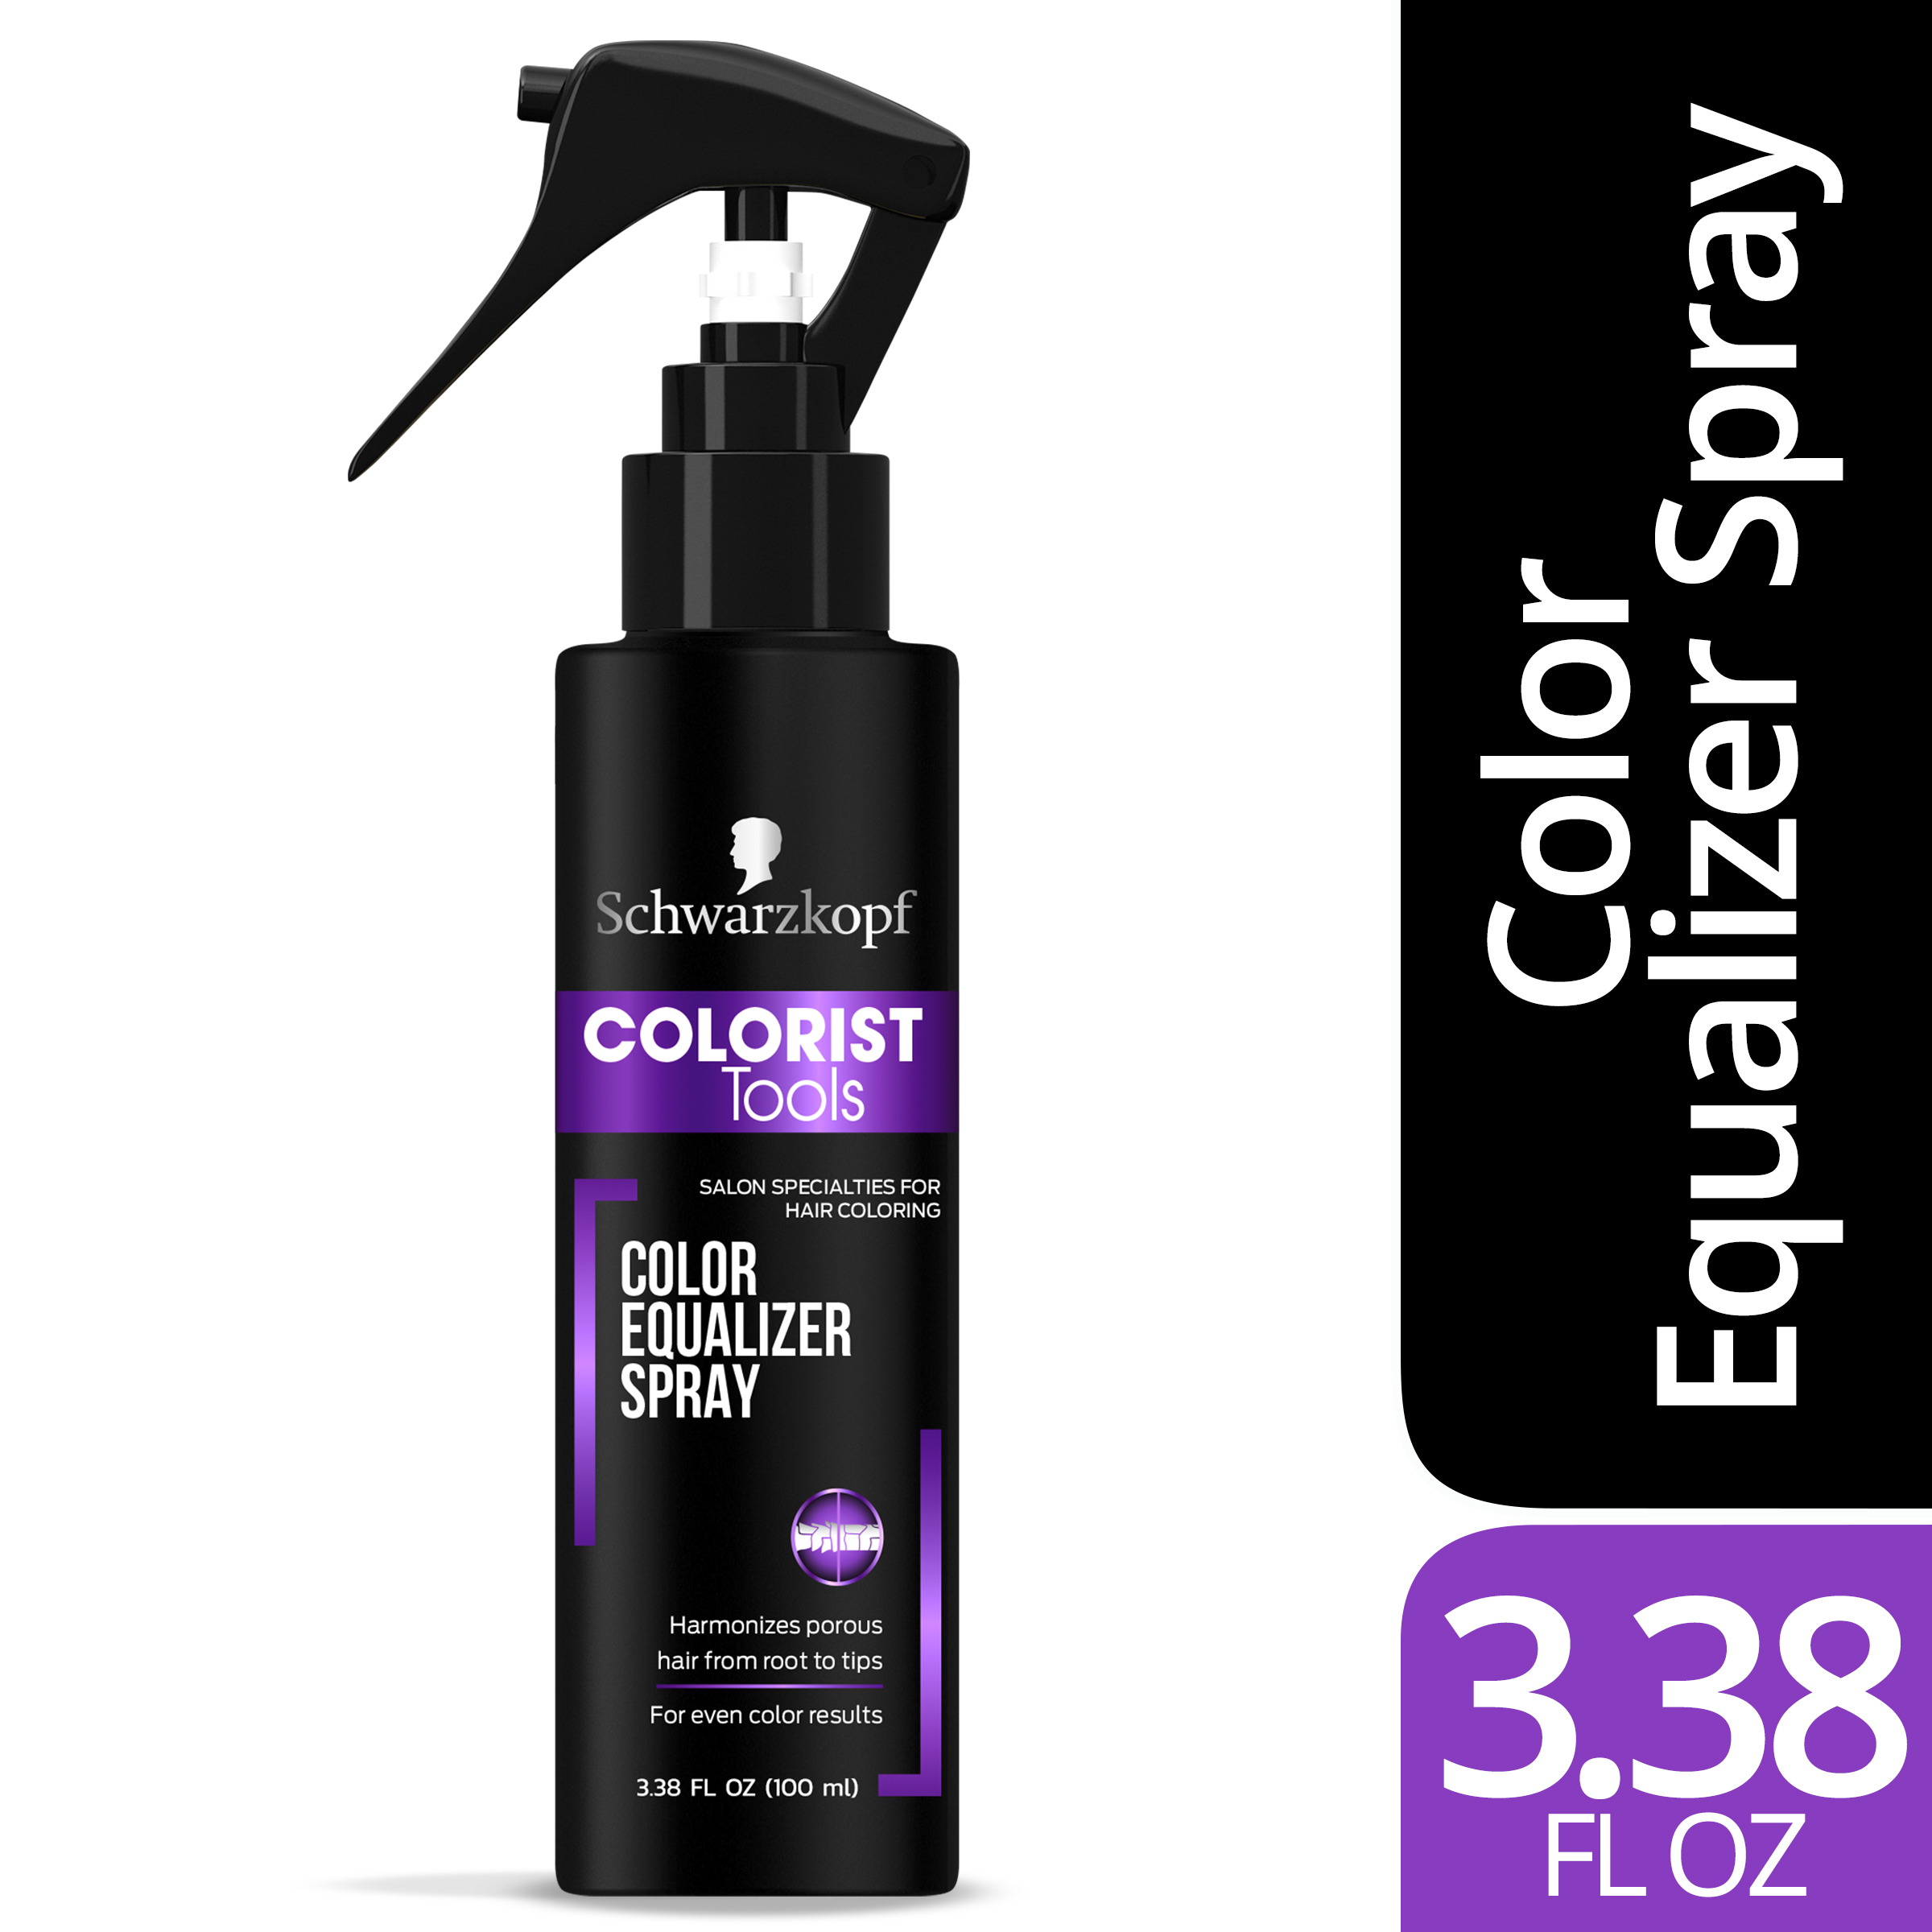 Schwarzkopf Colorist Tools Hair Dye Color Equalizer Spray, 3.38 ounce - image 1 of 7